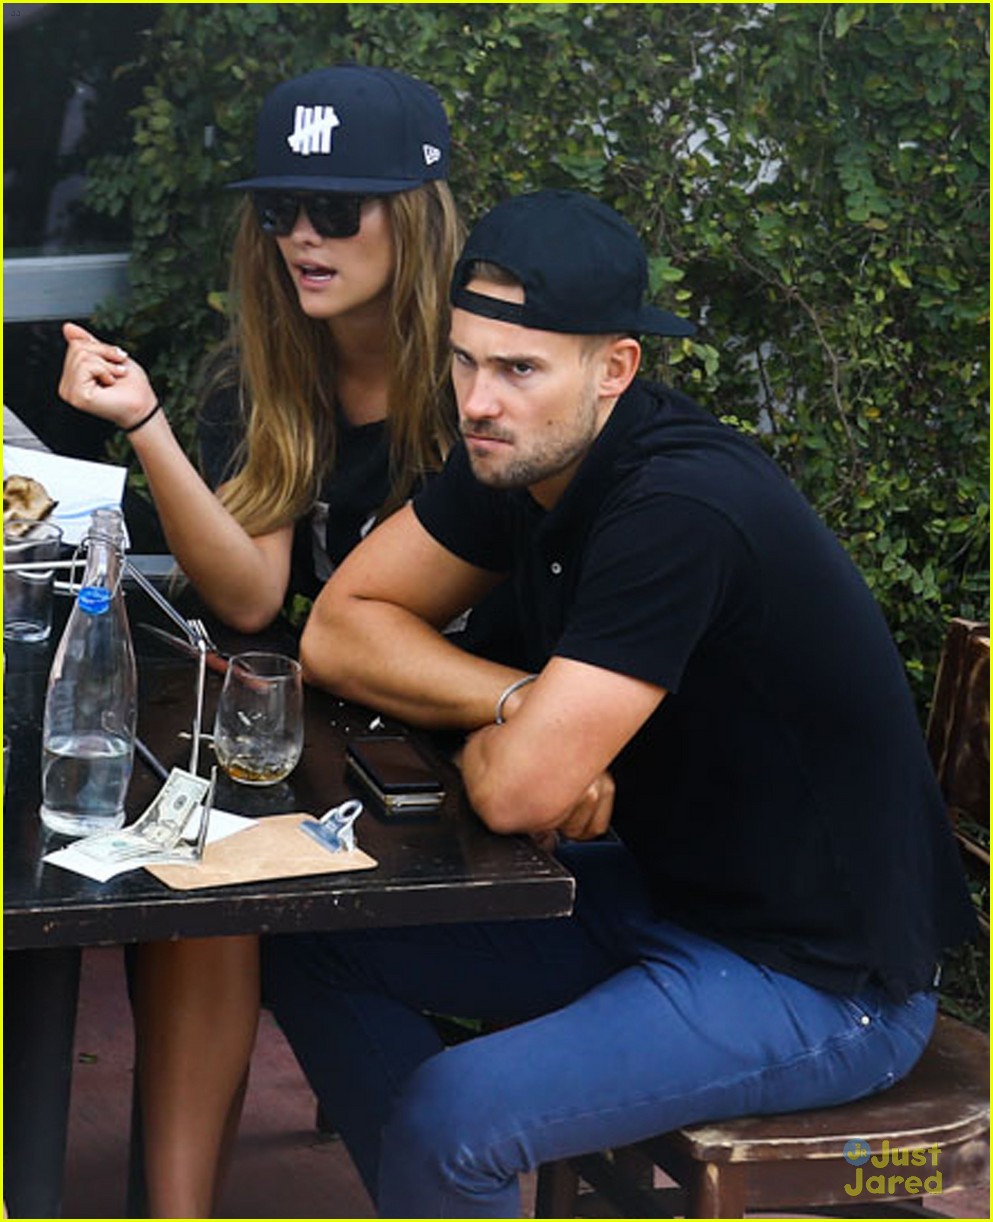 nina agdal shares cutes moments with her boyfriend in miami 08